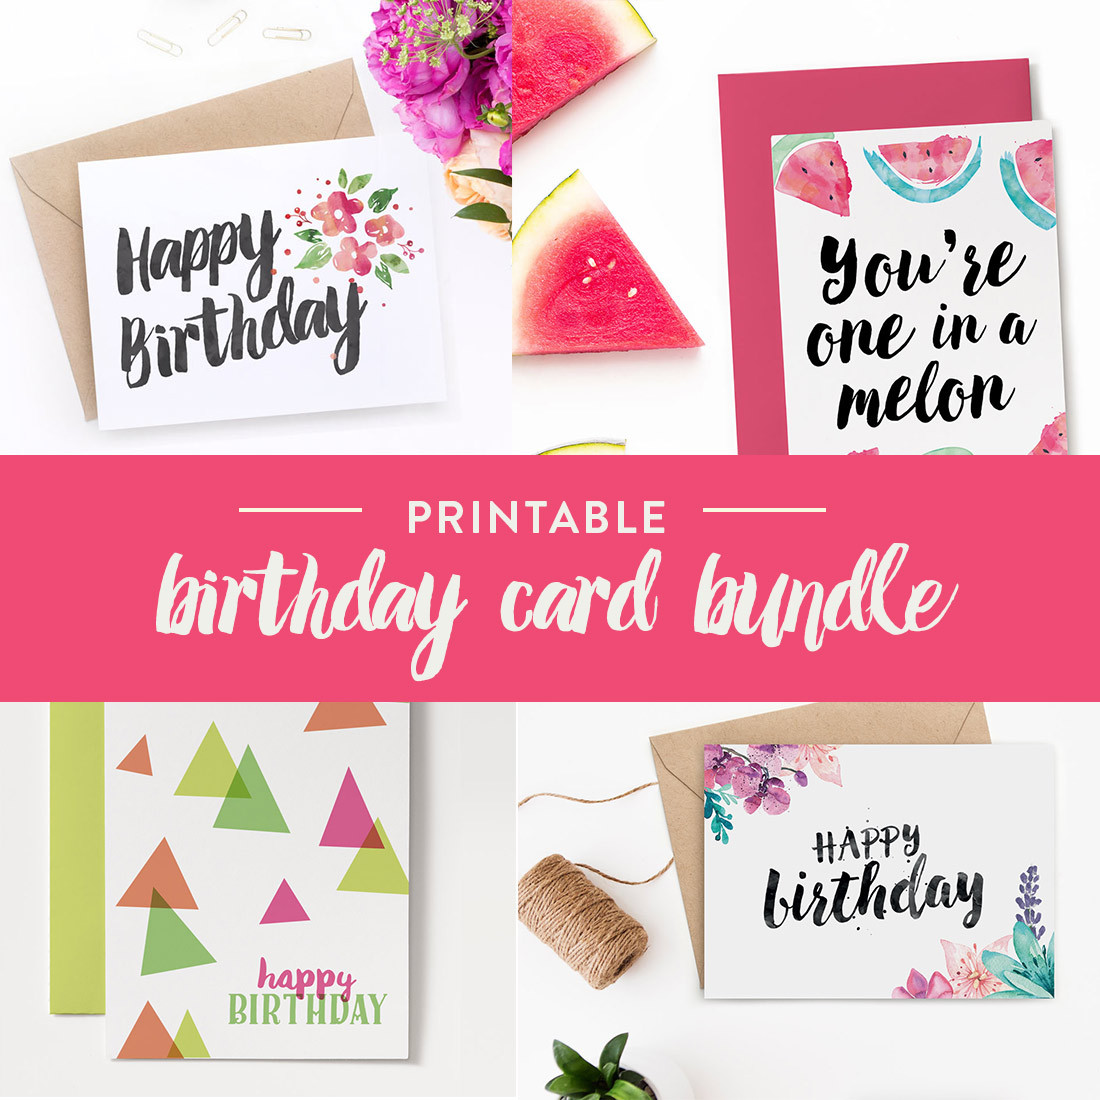 Birthday Cards To Print Out
 Printable Birthday Cards – Bundle